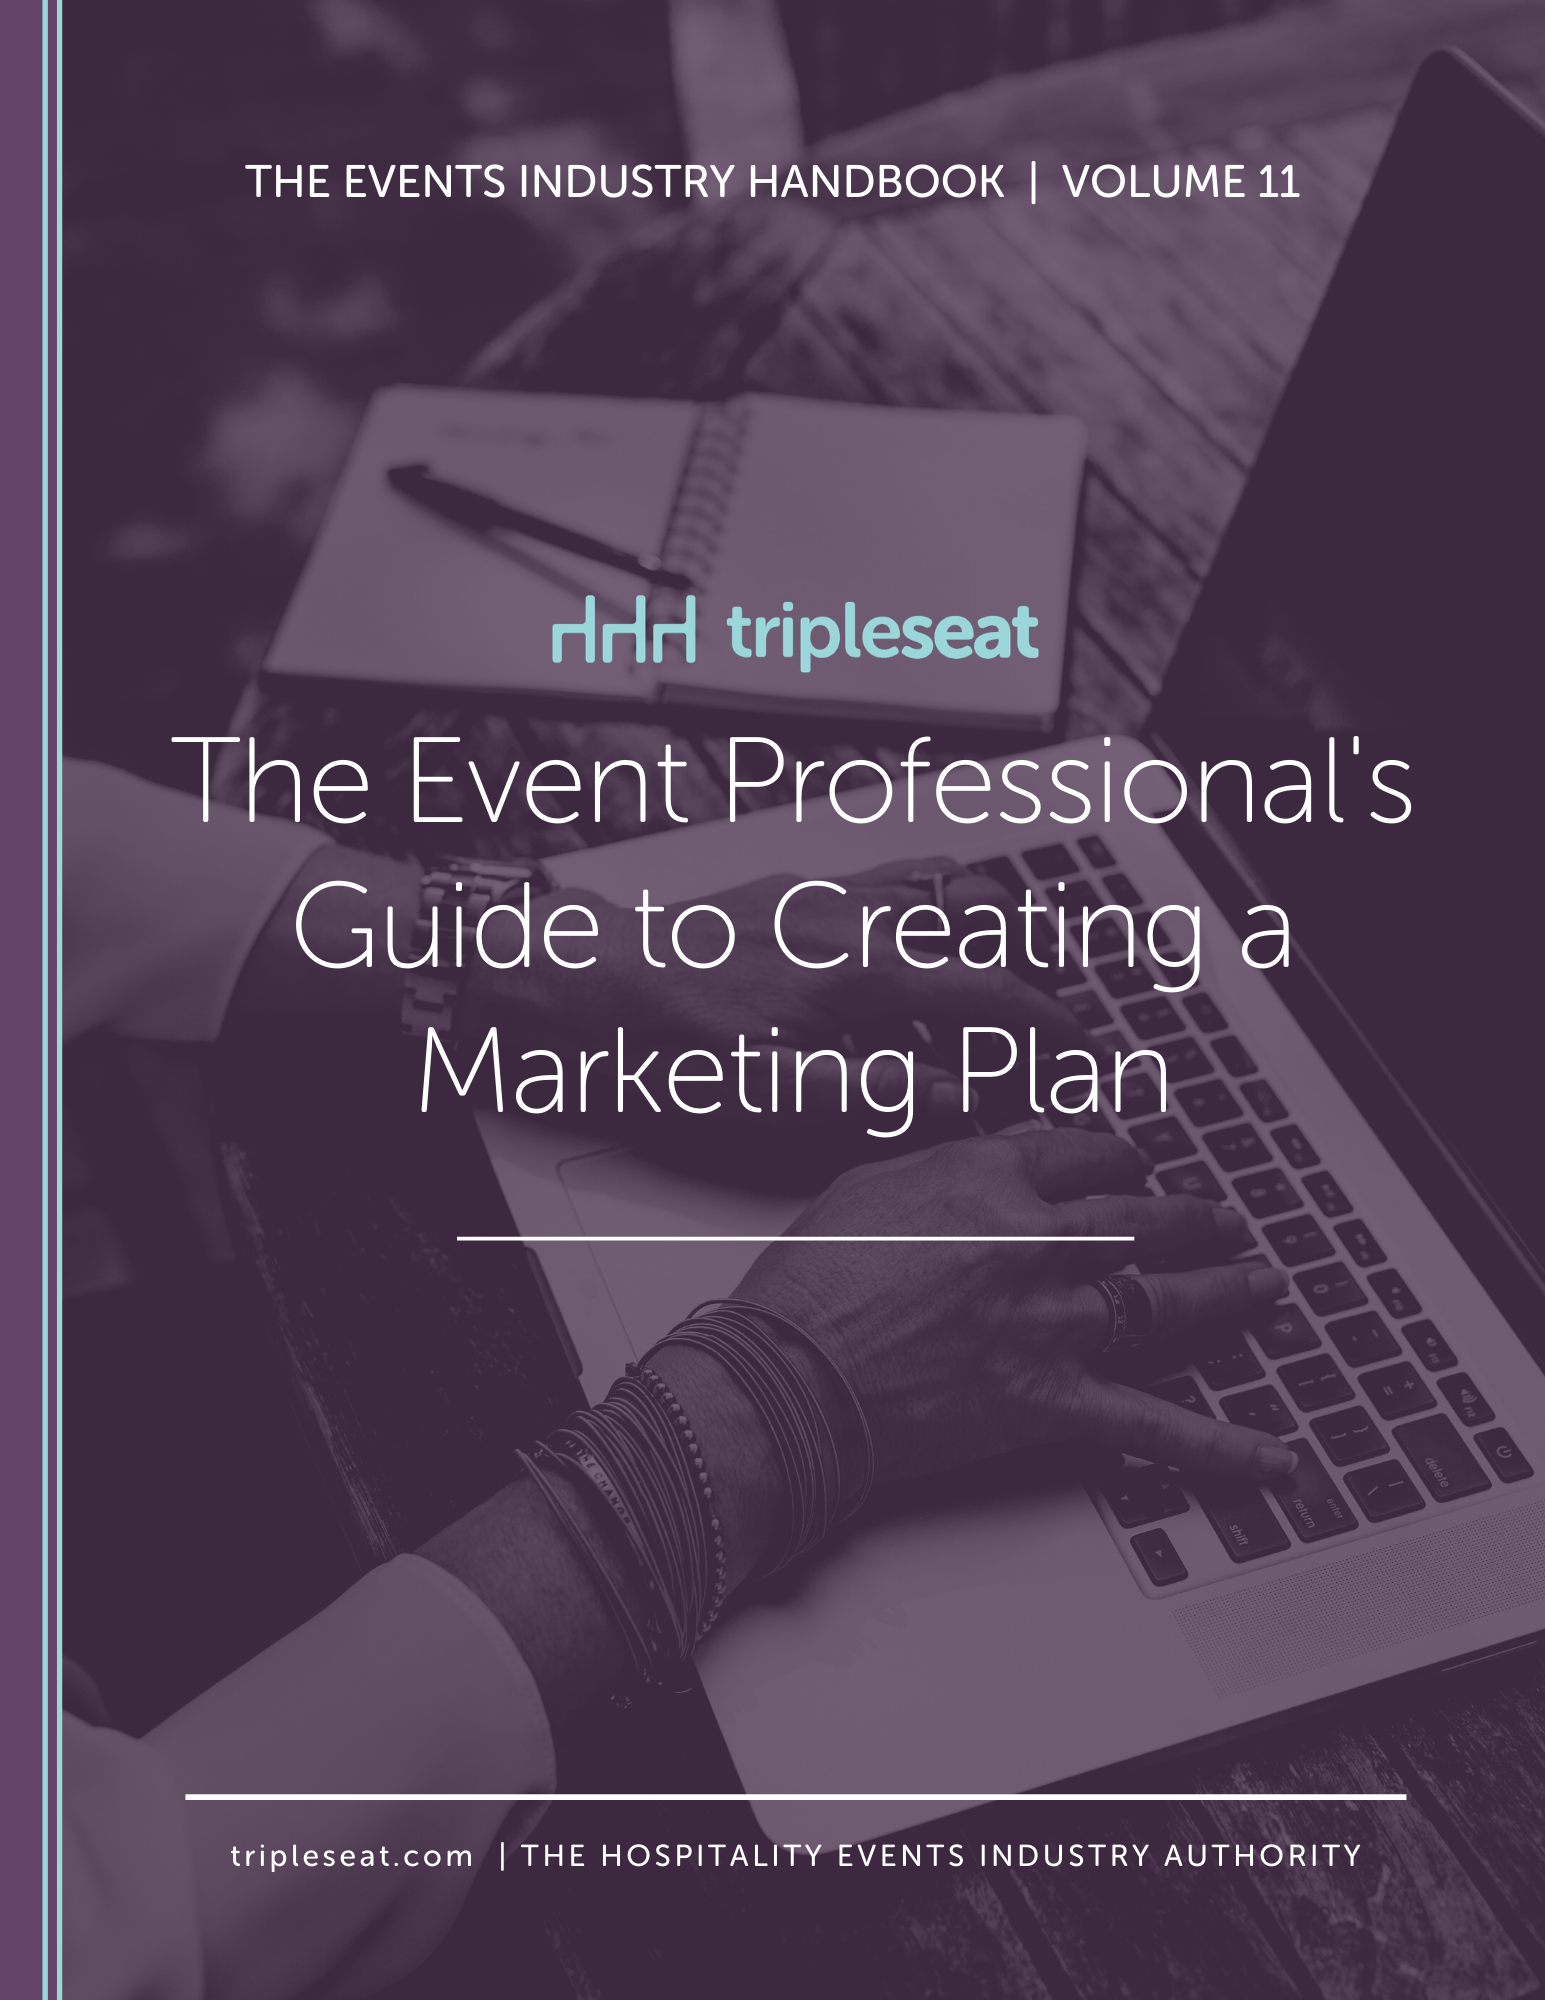 The Event Professionals Guide to Creating a Marketing Plan